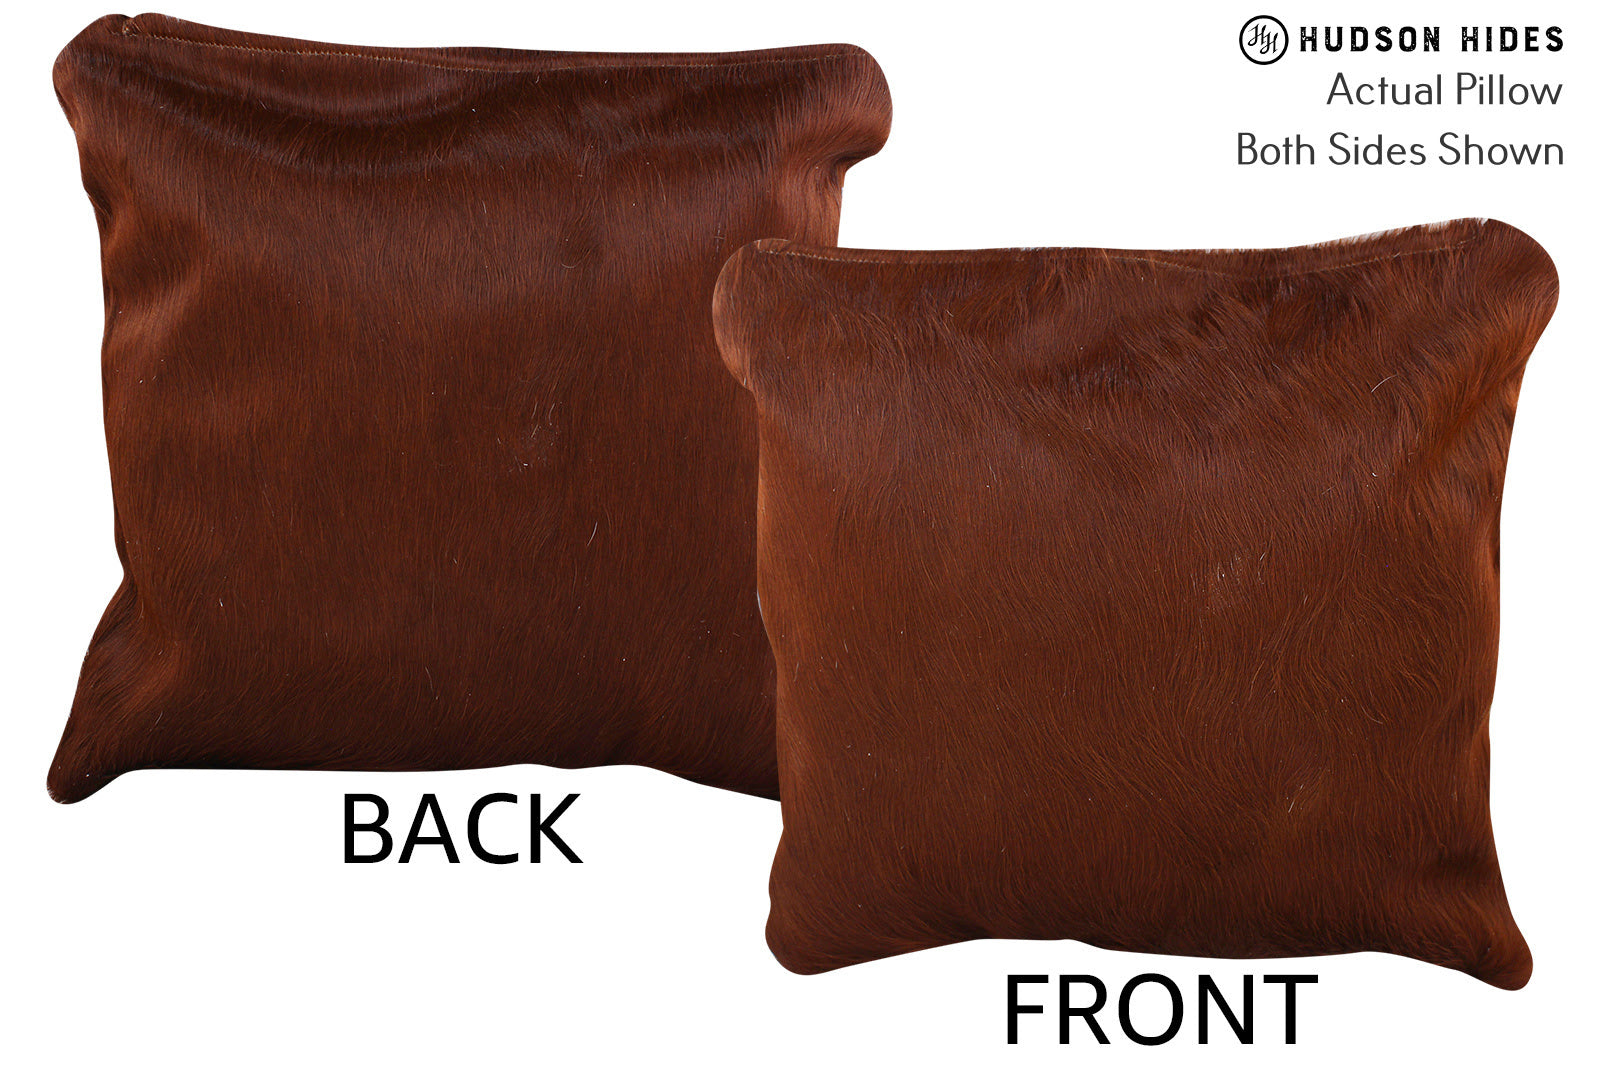 Solid Brown Cowhide Pillow #75151